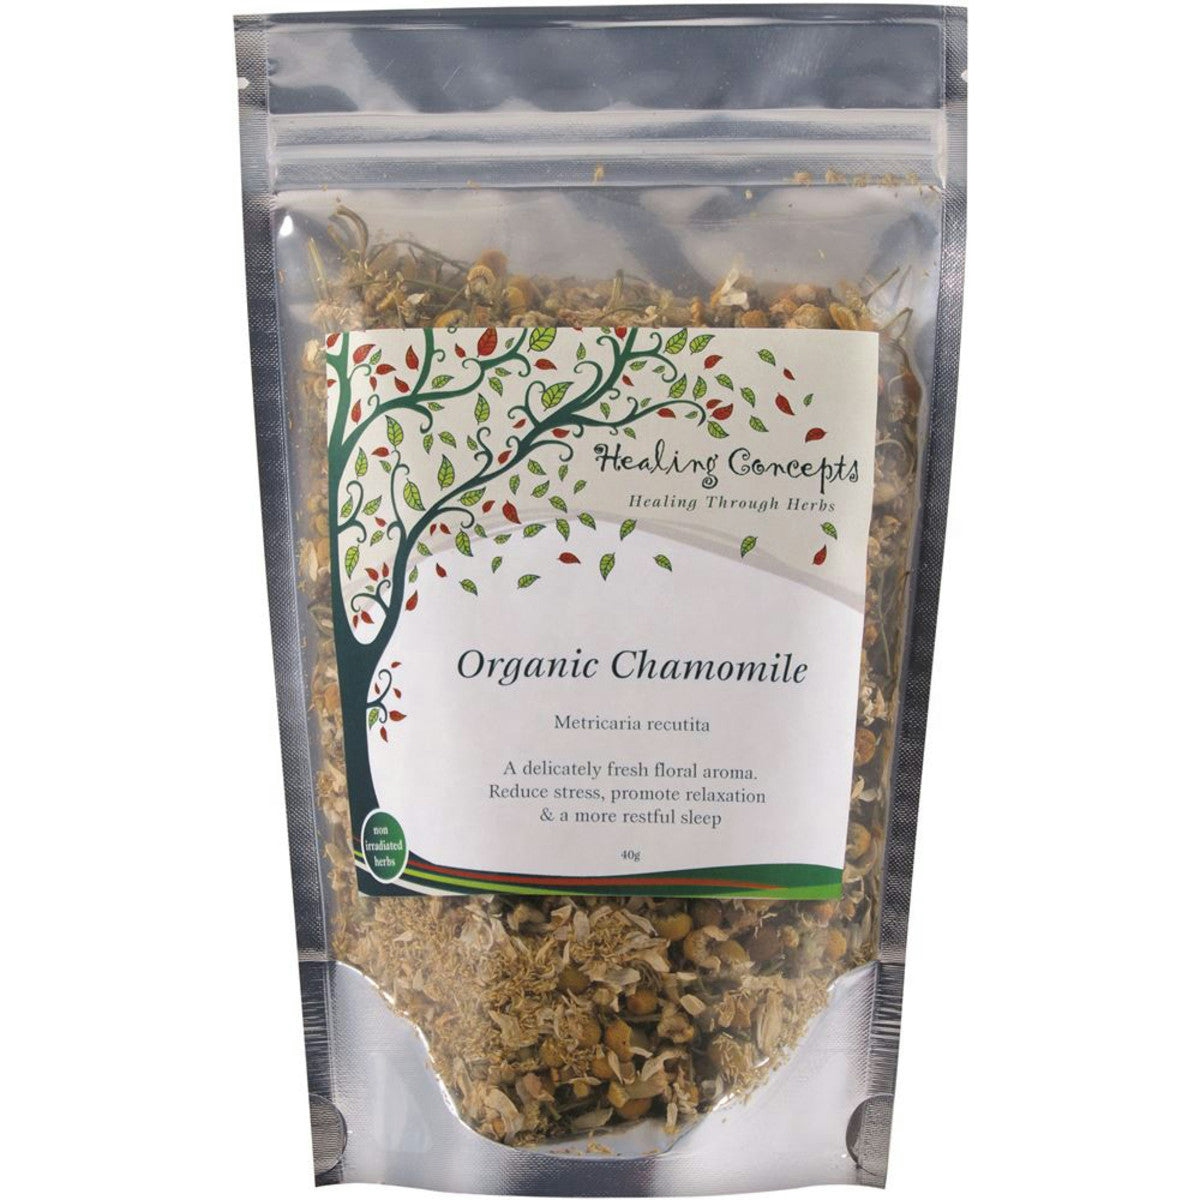 image of Healing Concepts Organic Chamomile Tea 40g on white background 